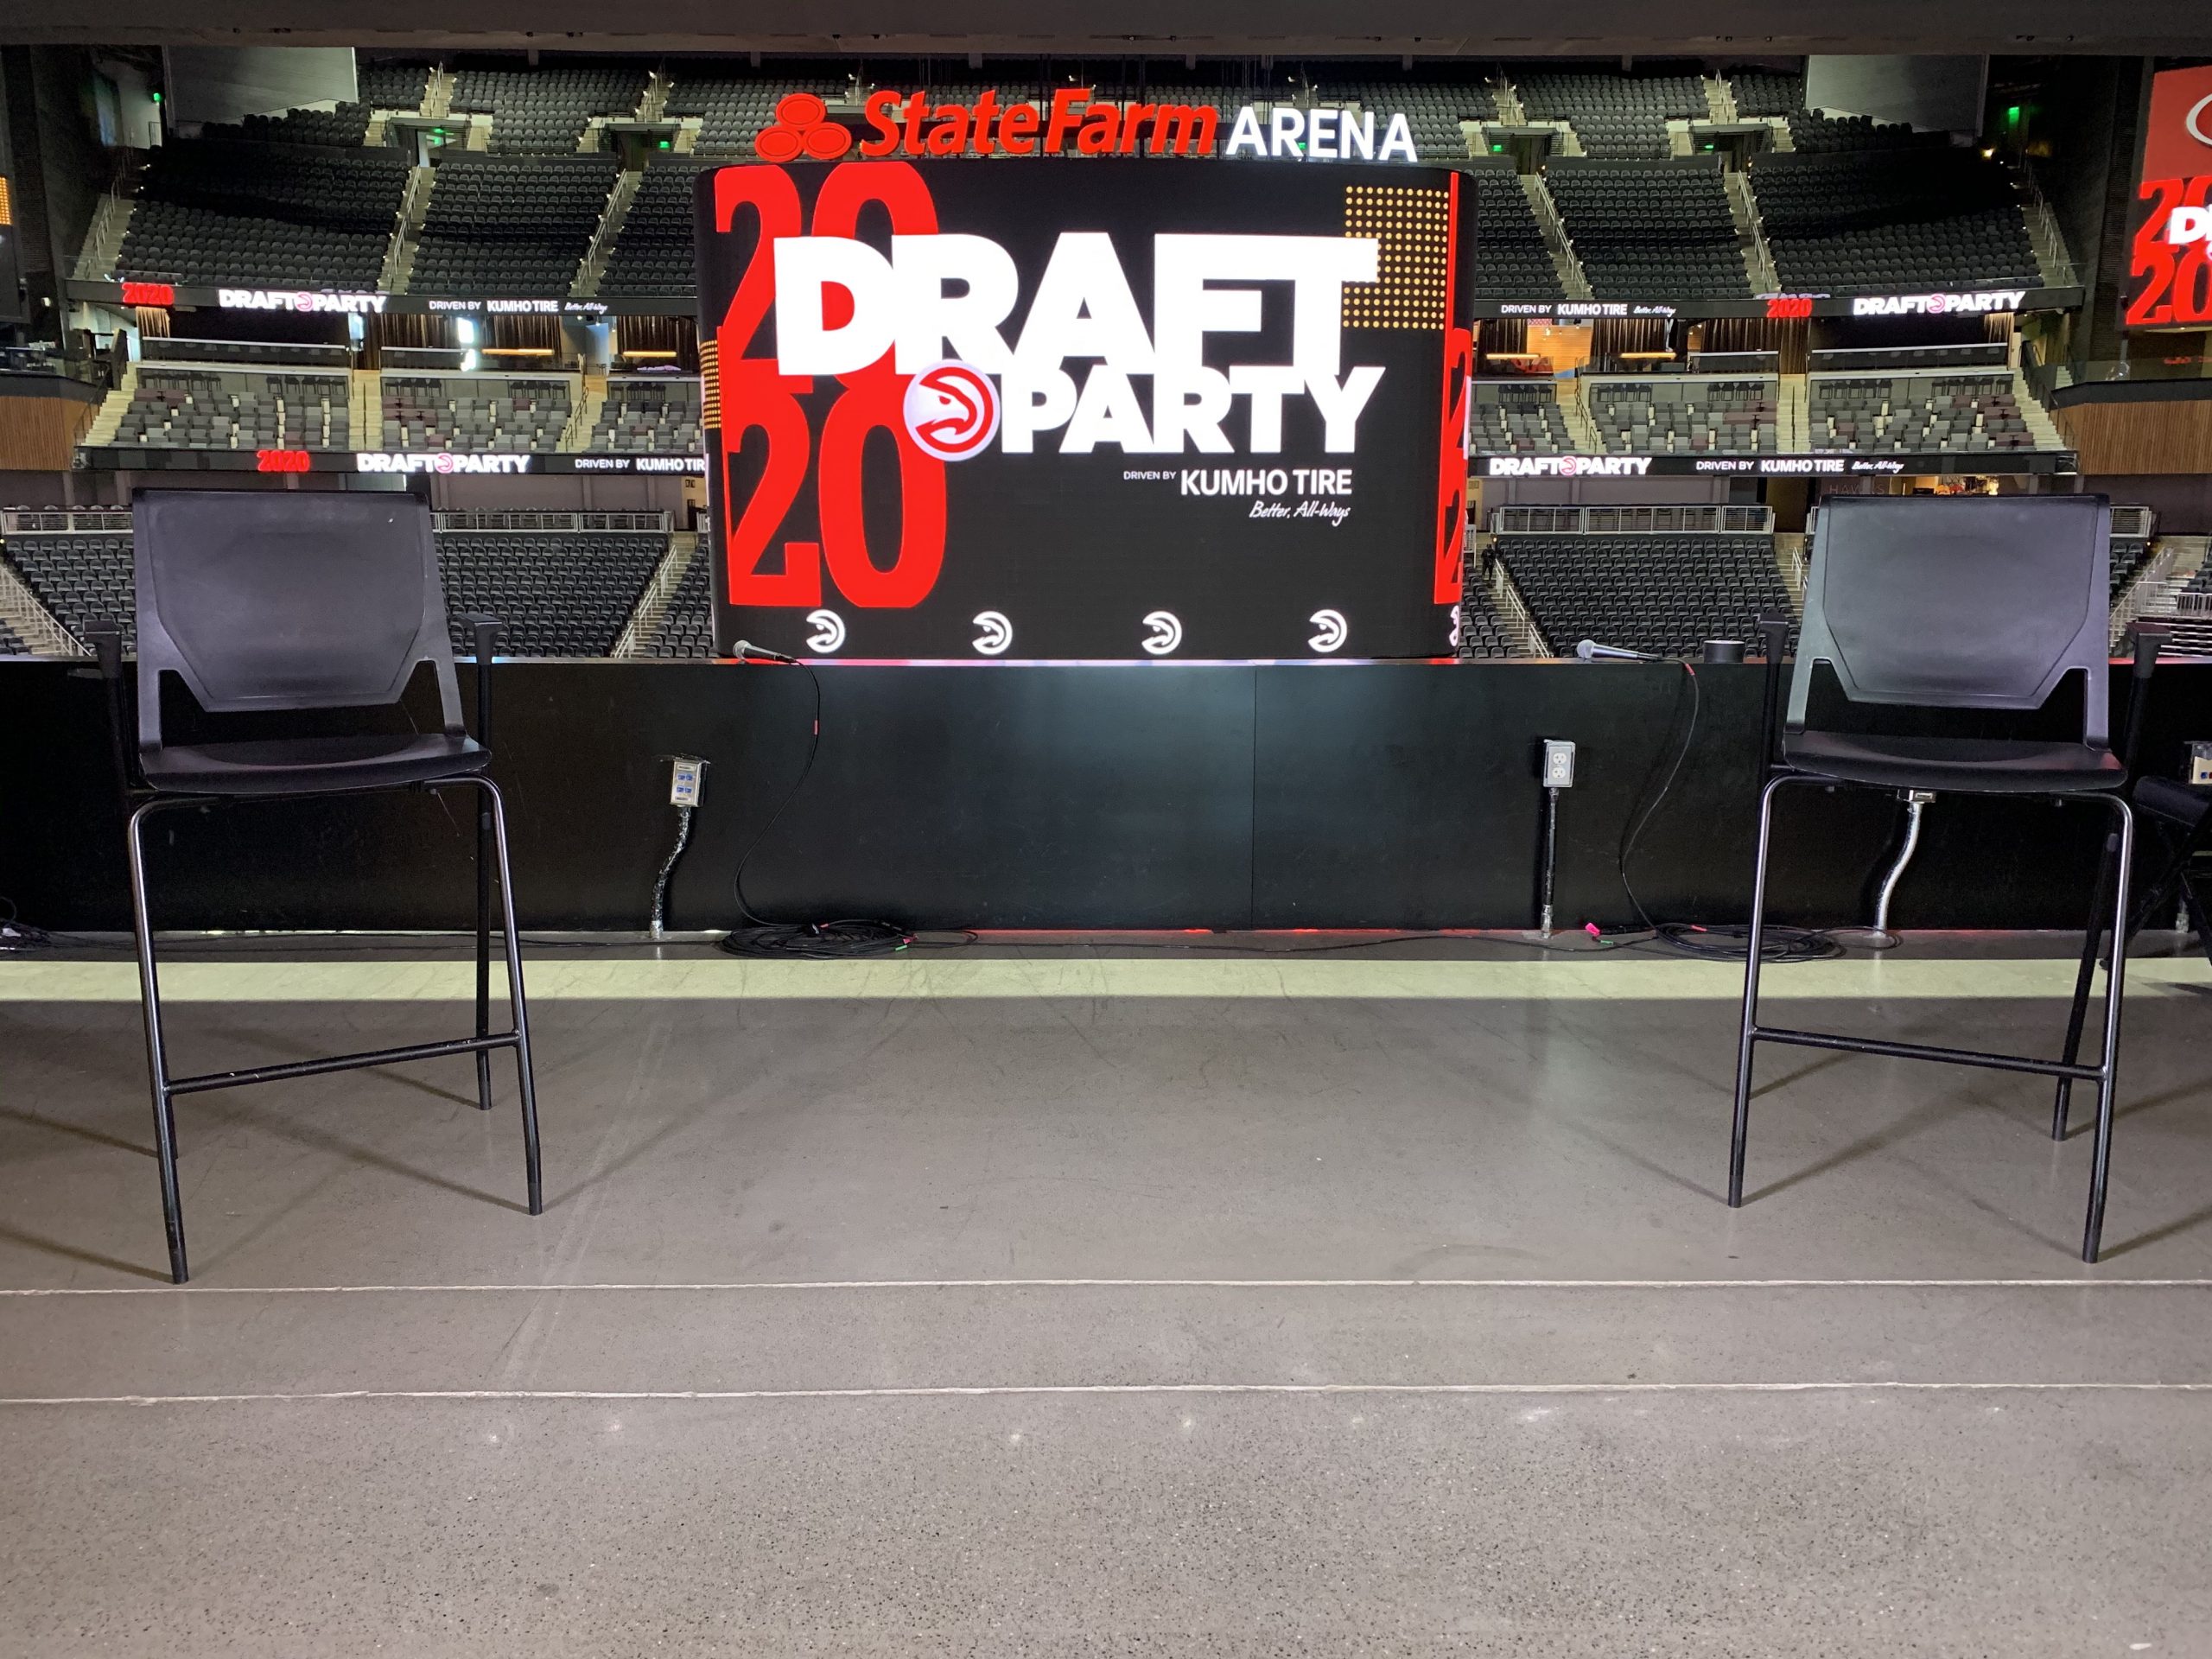 Hawks NBA Draft Party at State Farm Arena, How to get tickets